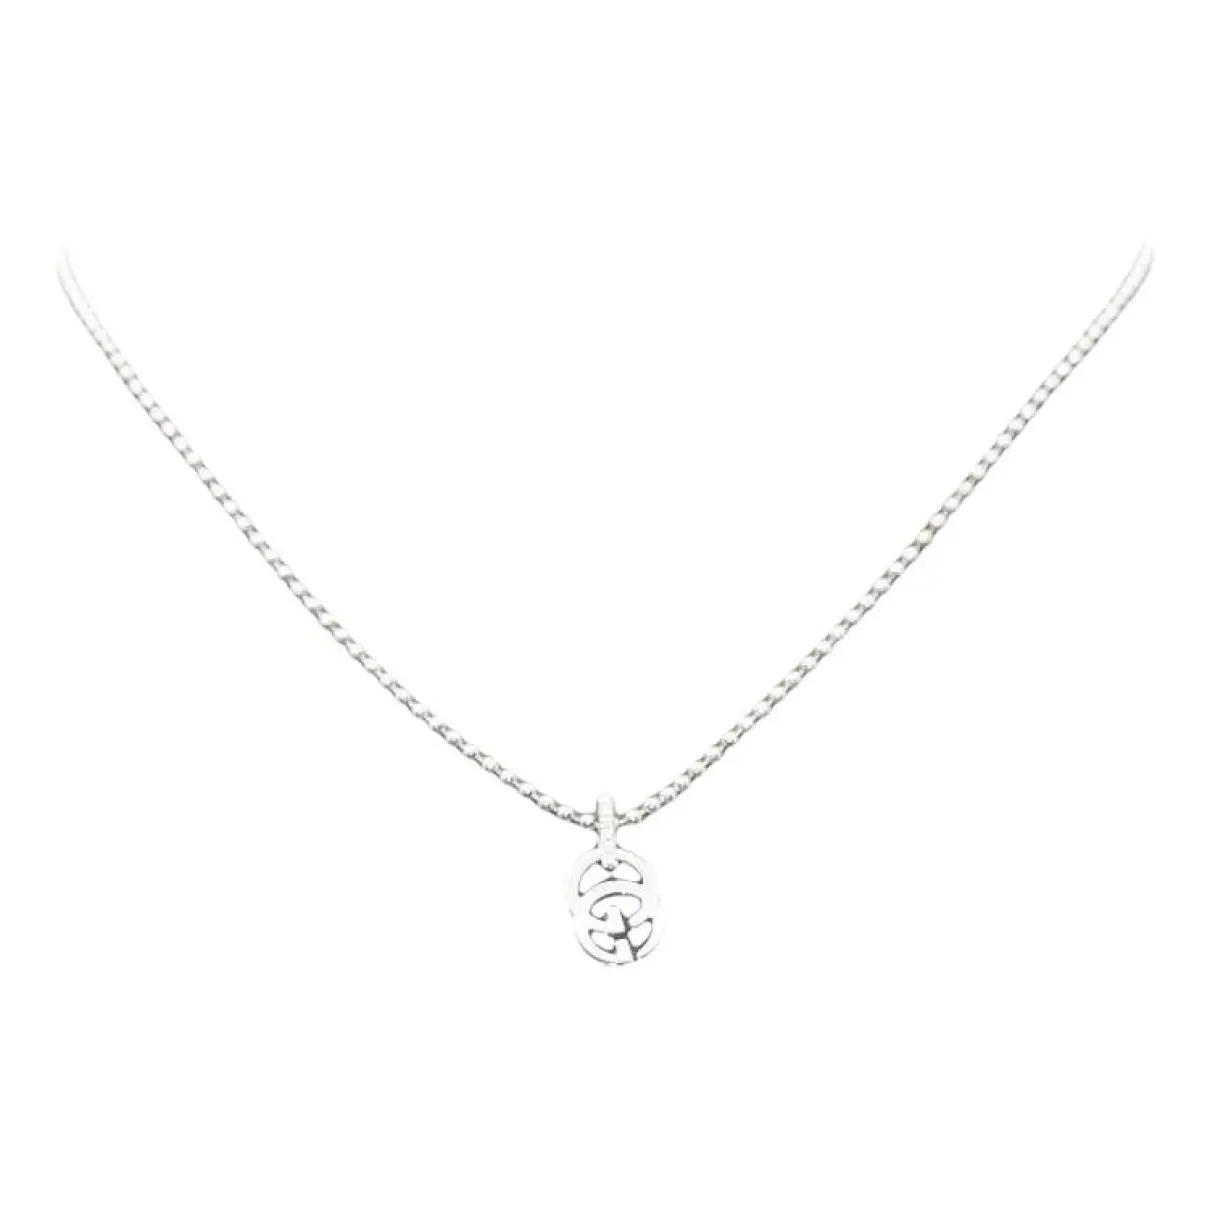 GG Running white gold necklace